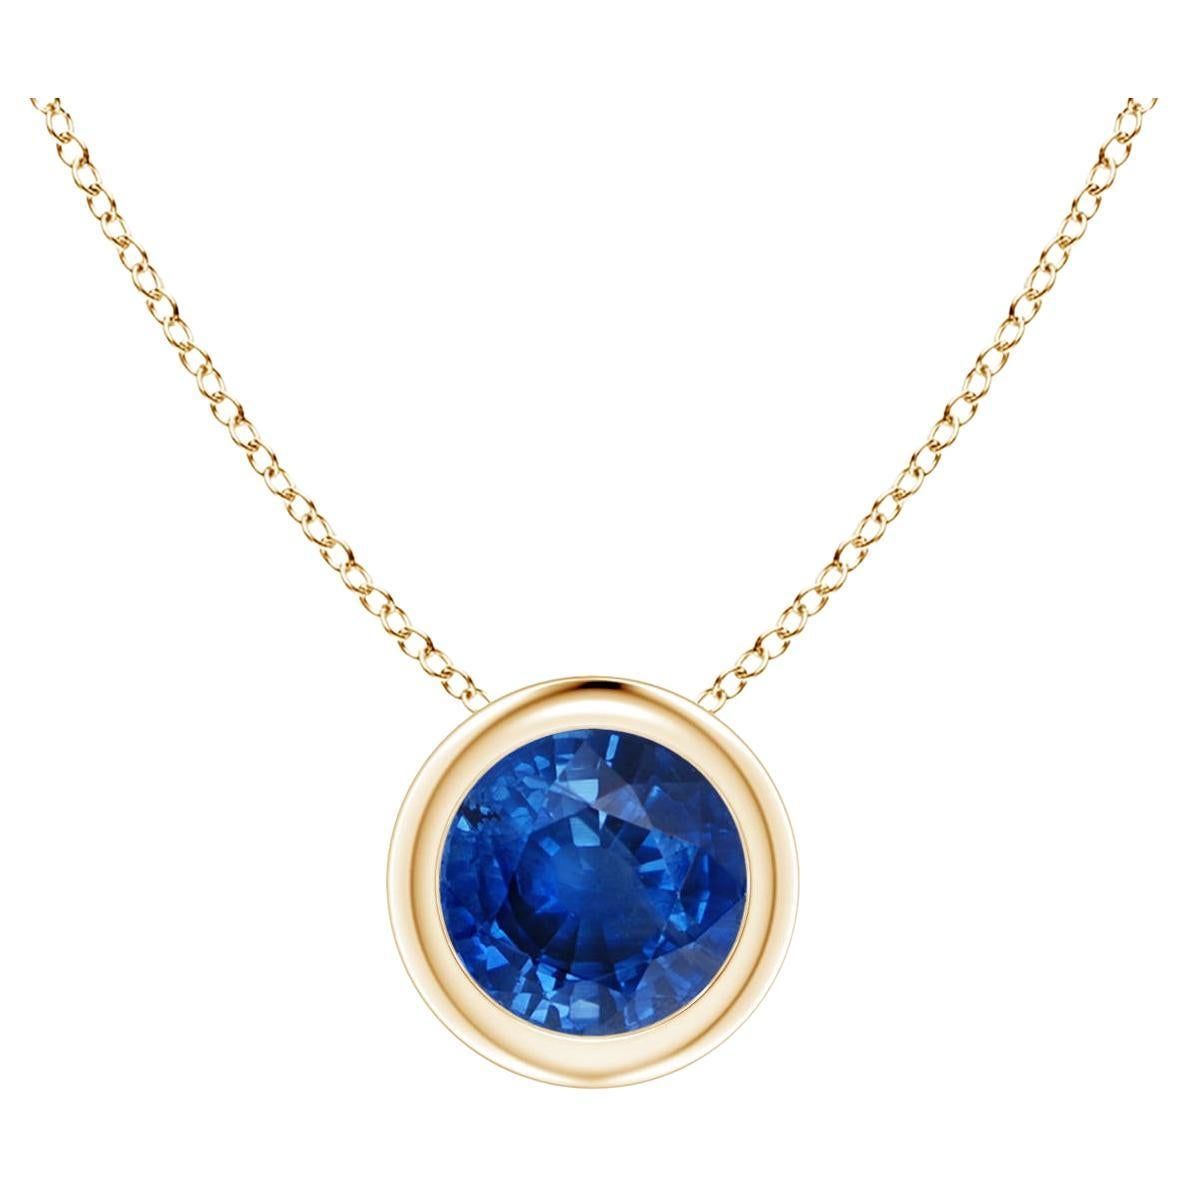 Natural Round Blue Sapphire Solitaire Pendant in 14K Yellow Gold Size-5mm